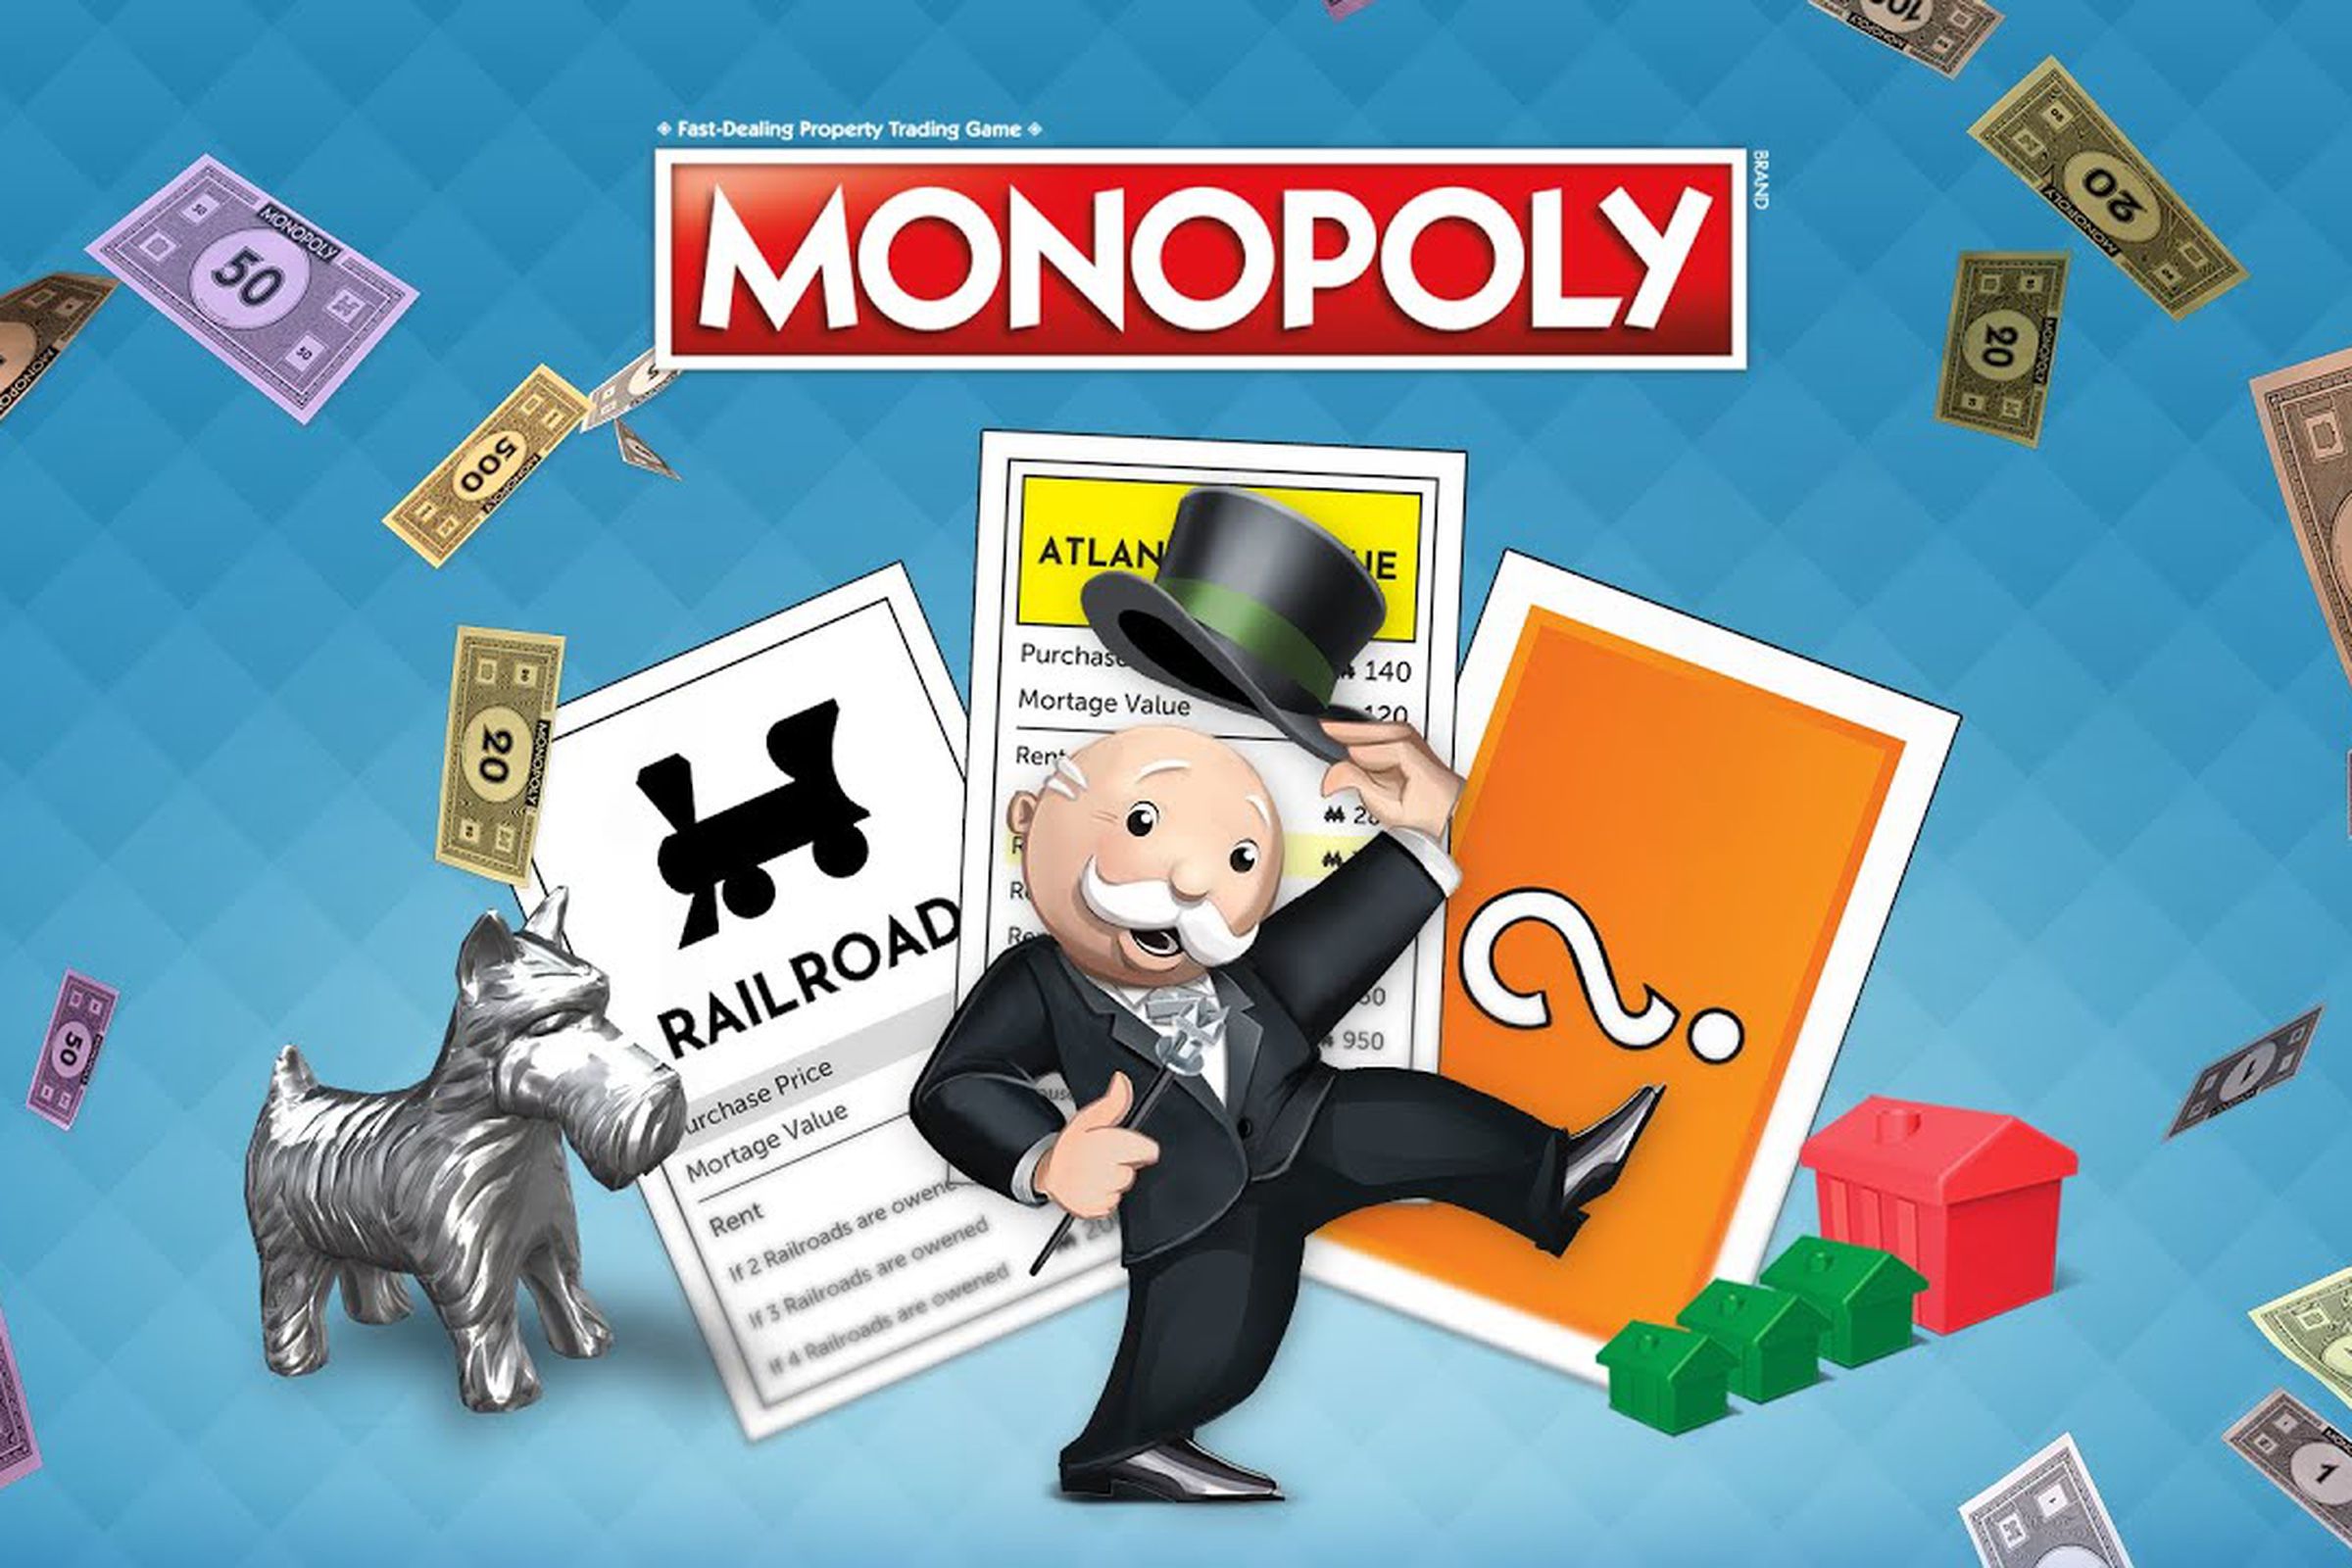 A cartoon illustration of a bald man in a tuxedo and top hat dancing in front of cards from the Monopoly board game.